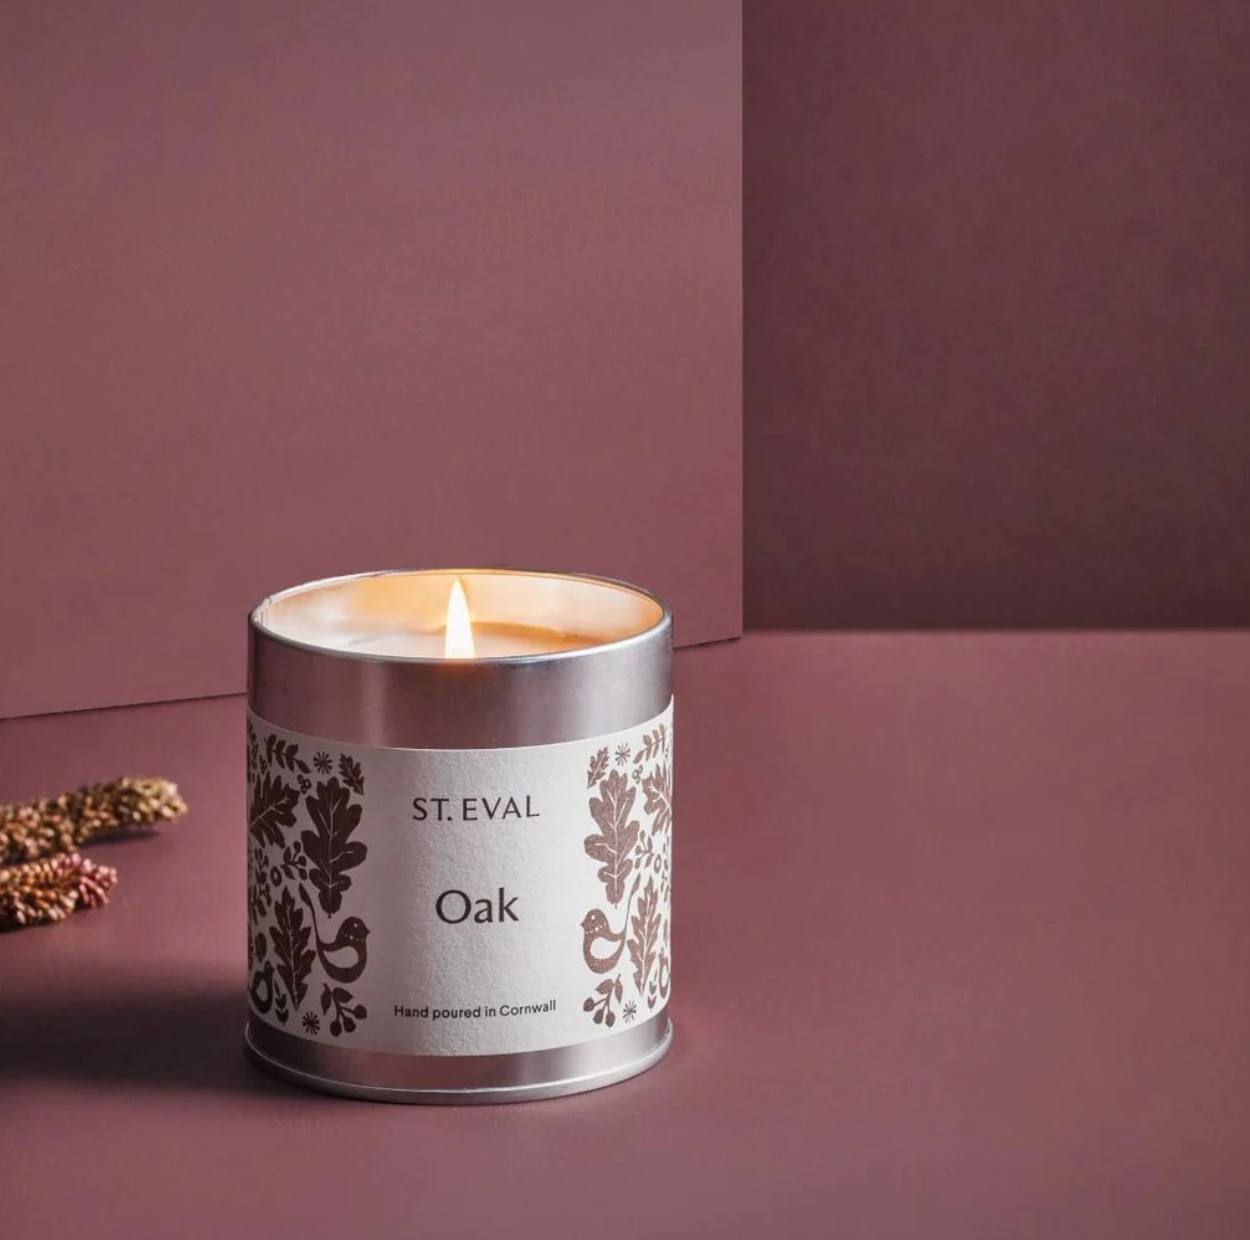 St Eval Oak Scented Tin Candle